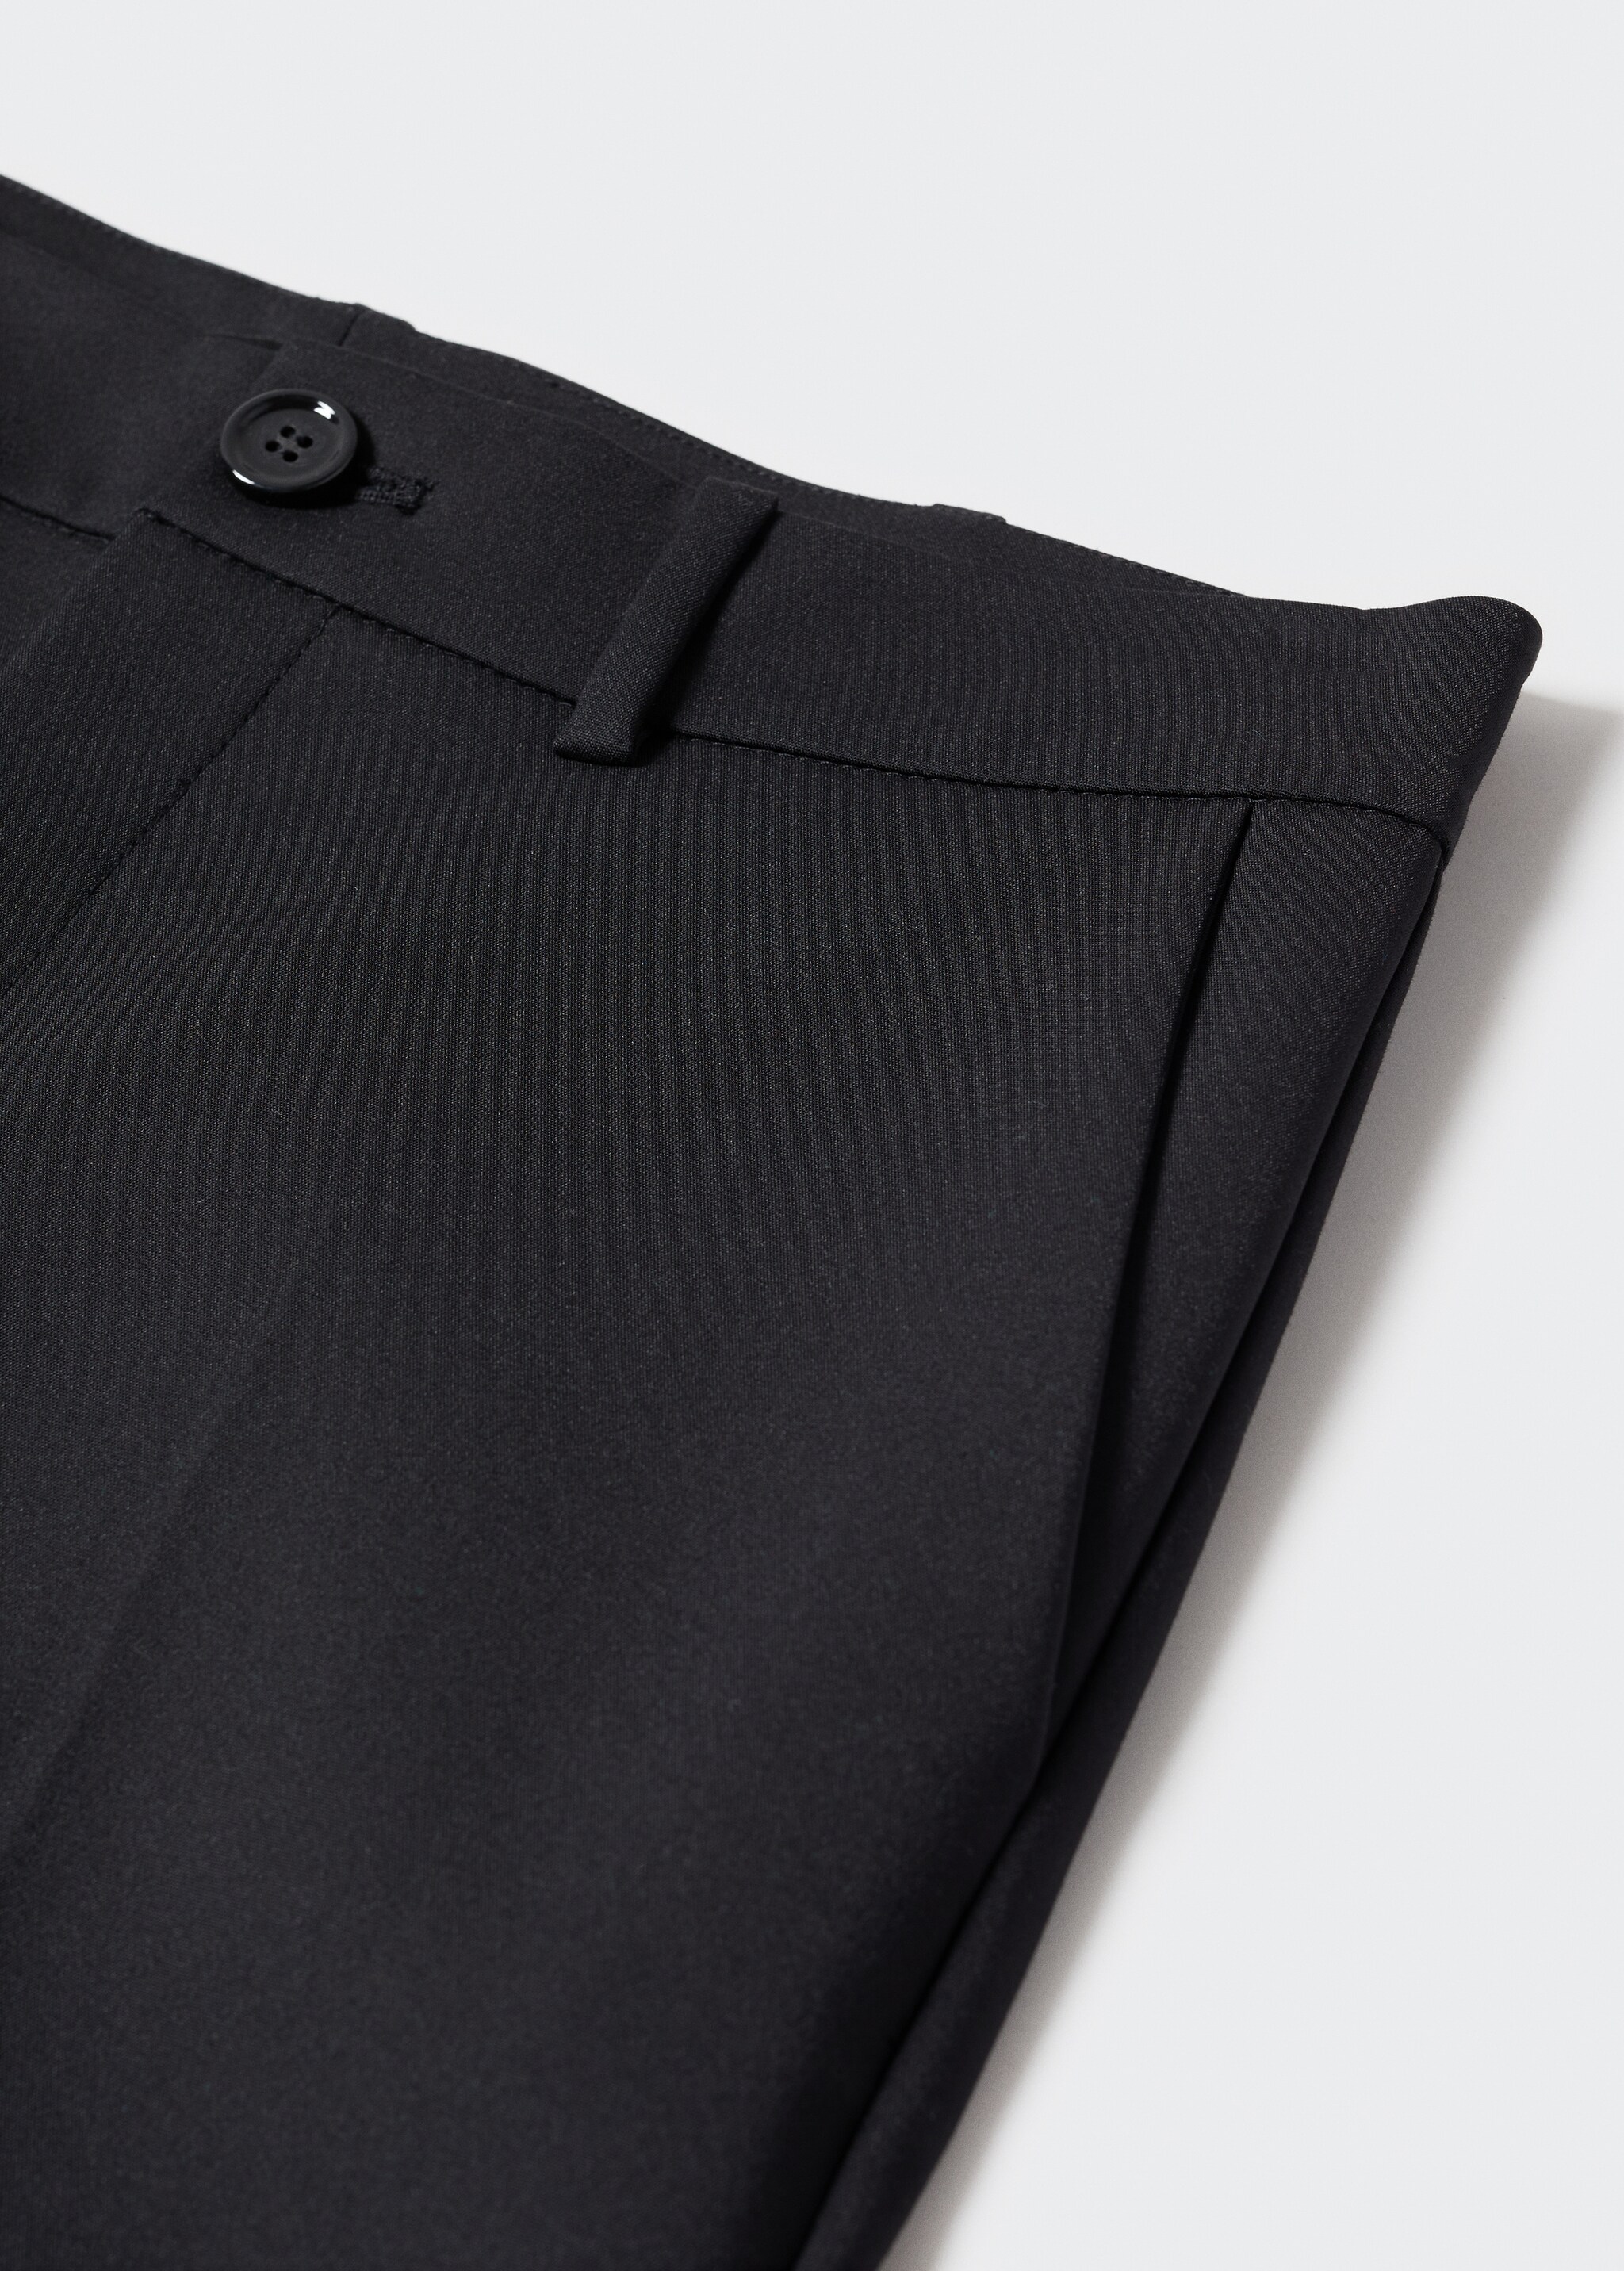 Skinny suit pants - Details of the article 8